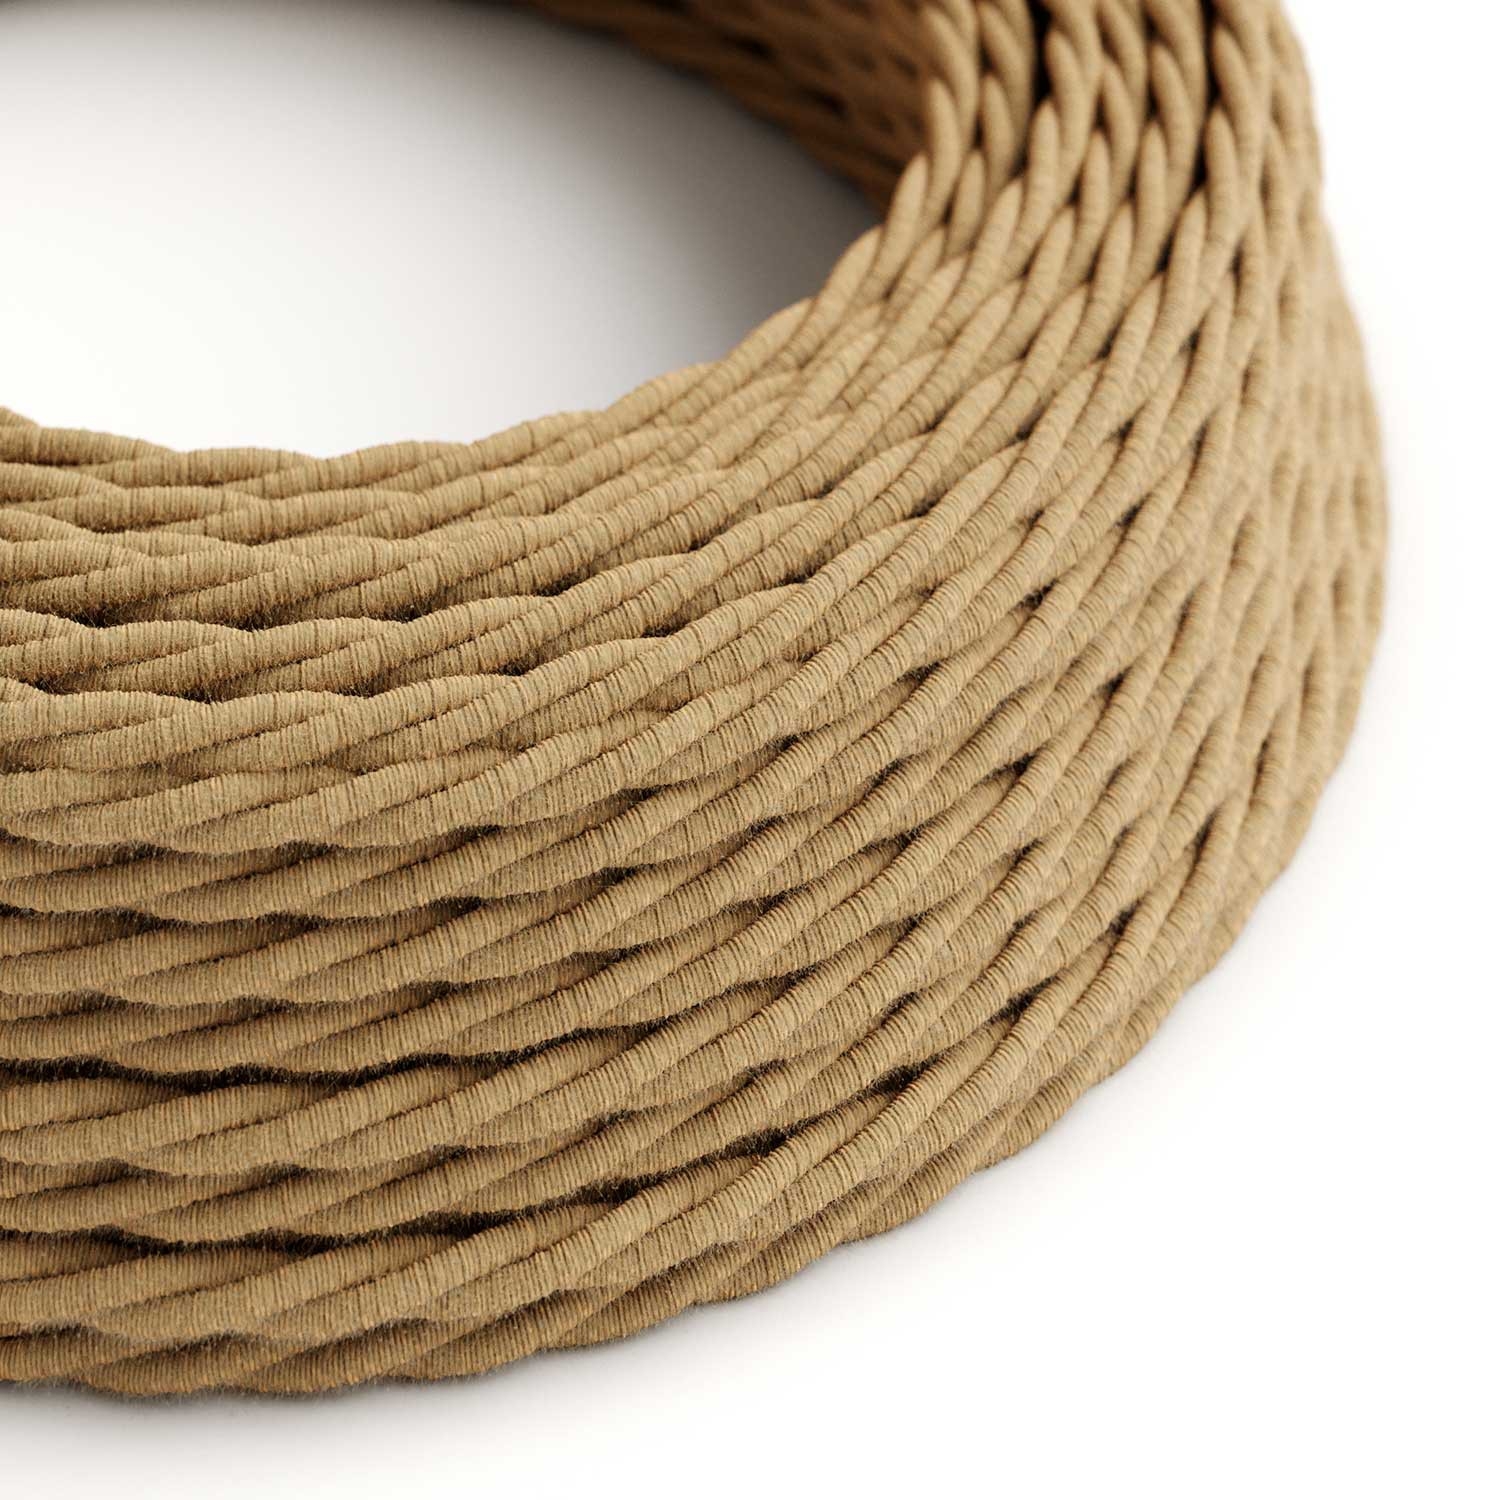 TN06 Jute Twisted Electrical Fabric Cloth Cord Cable